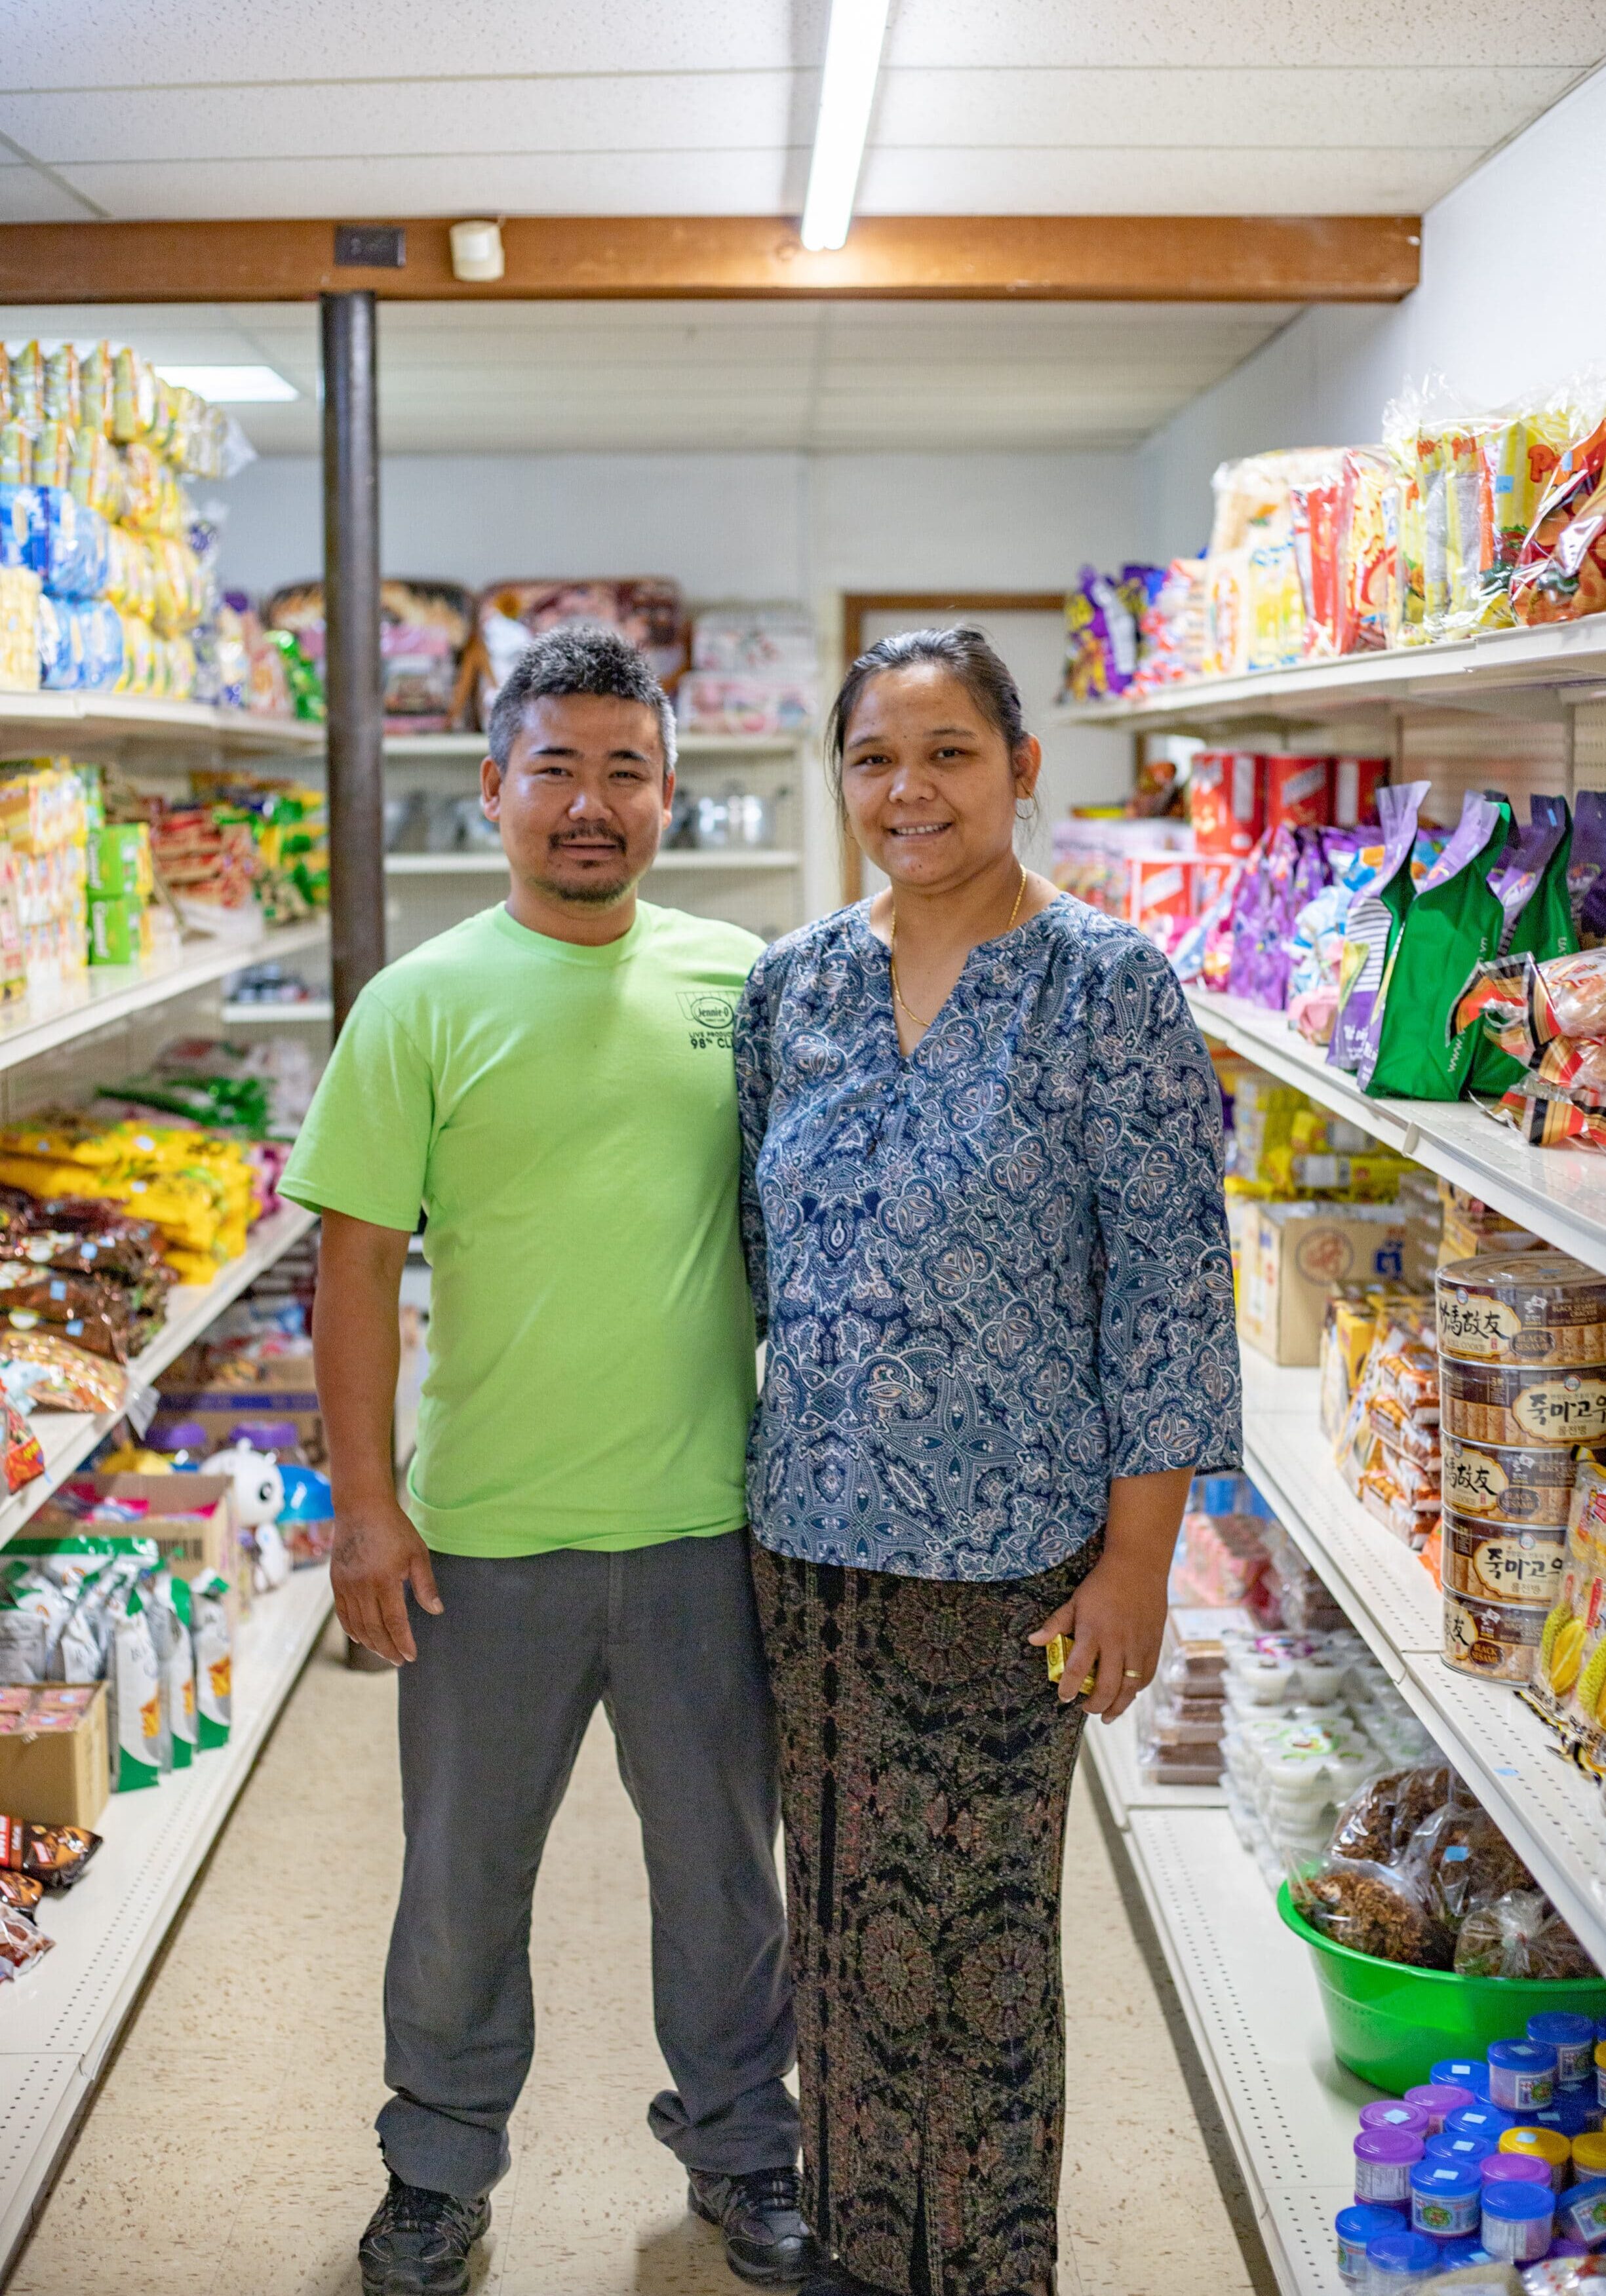 chaws market family owners standing in grocery isle